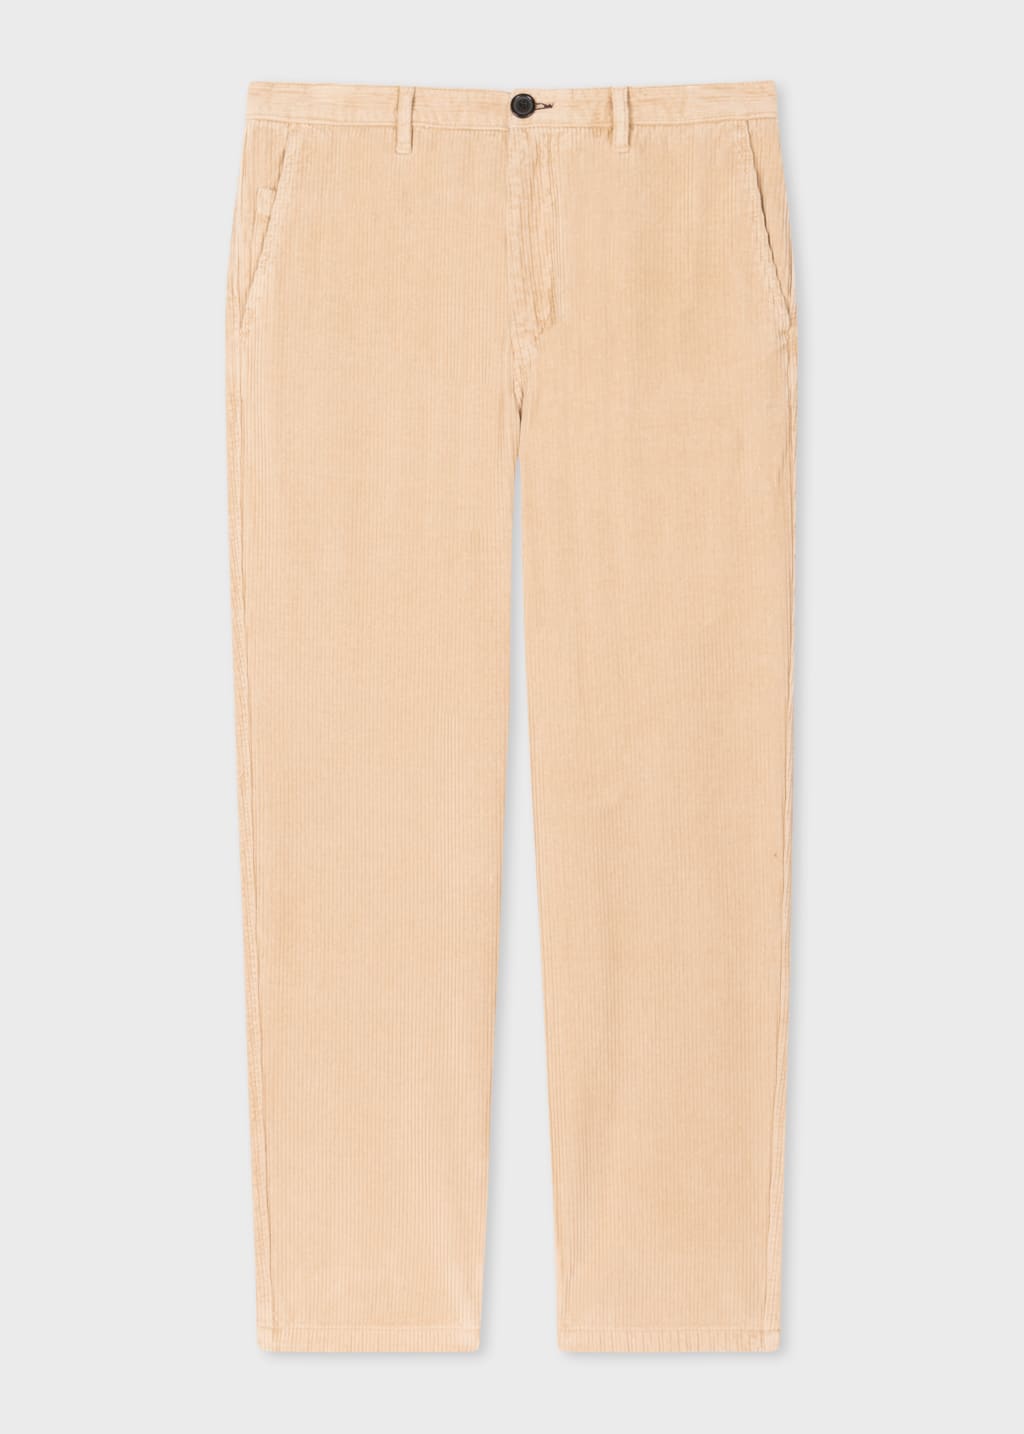 Front View - Loose-Fit Light Tan Corduroy Trousers Paul Smith